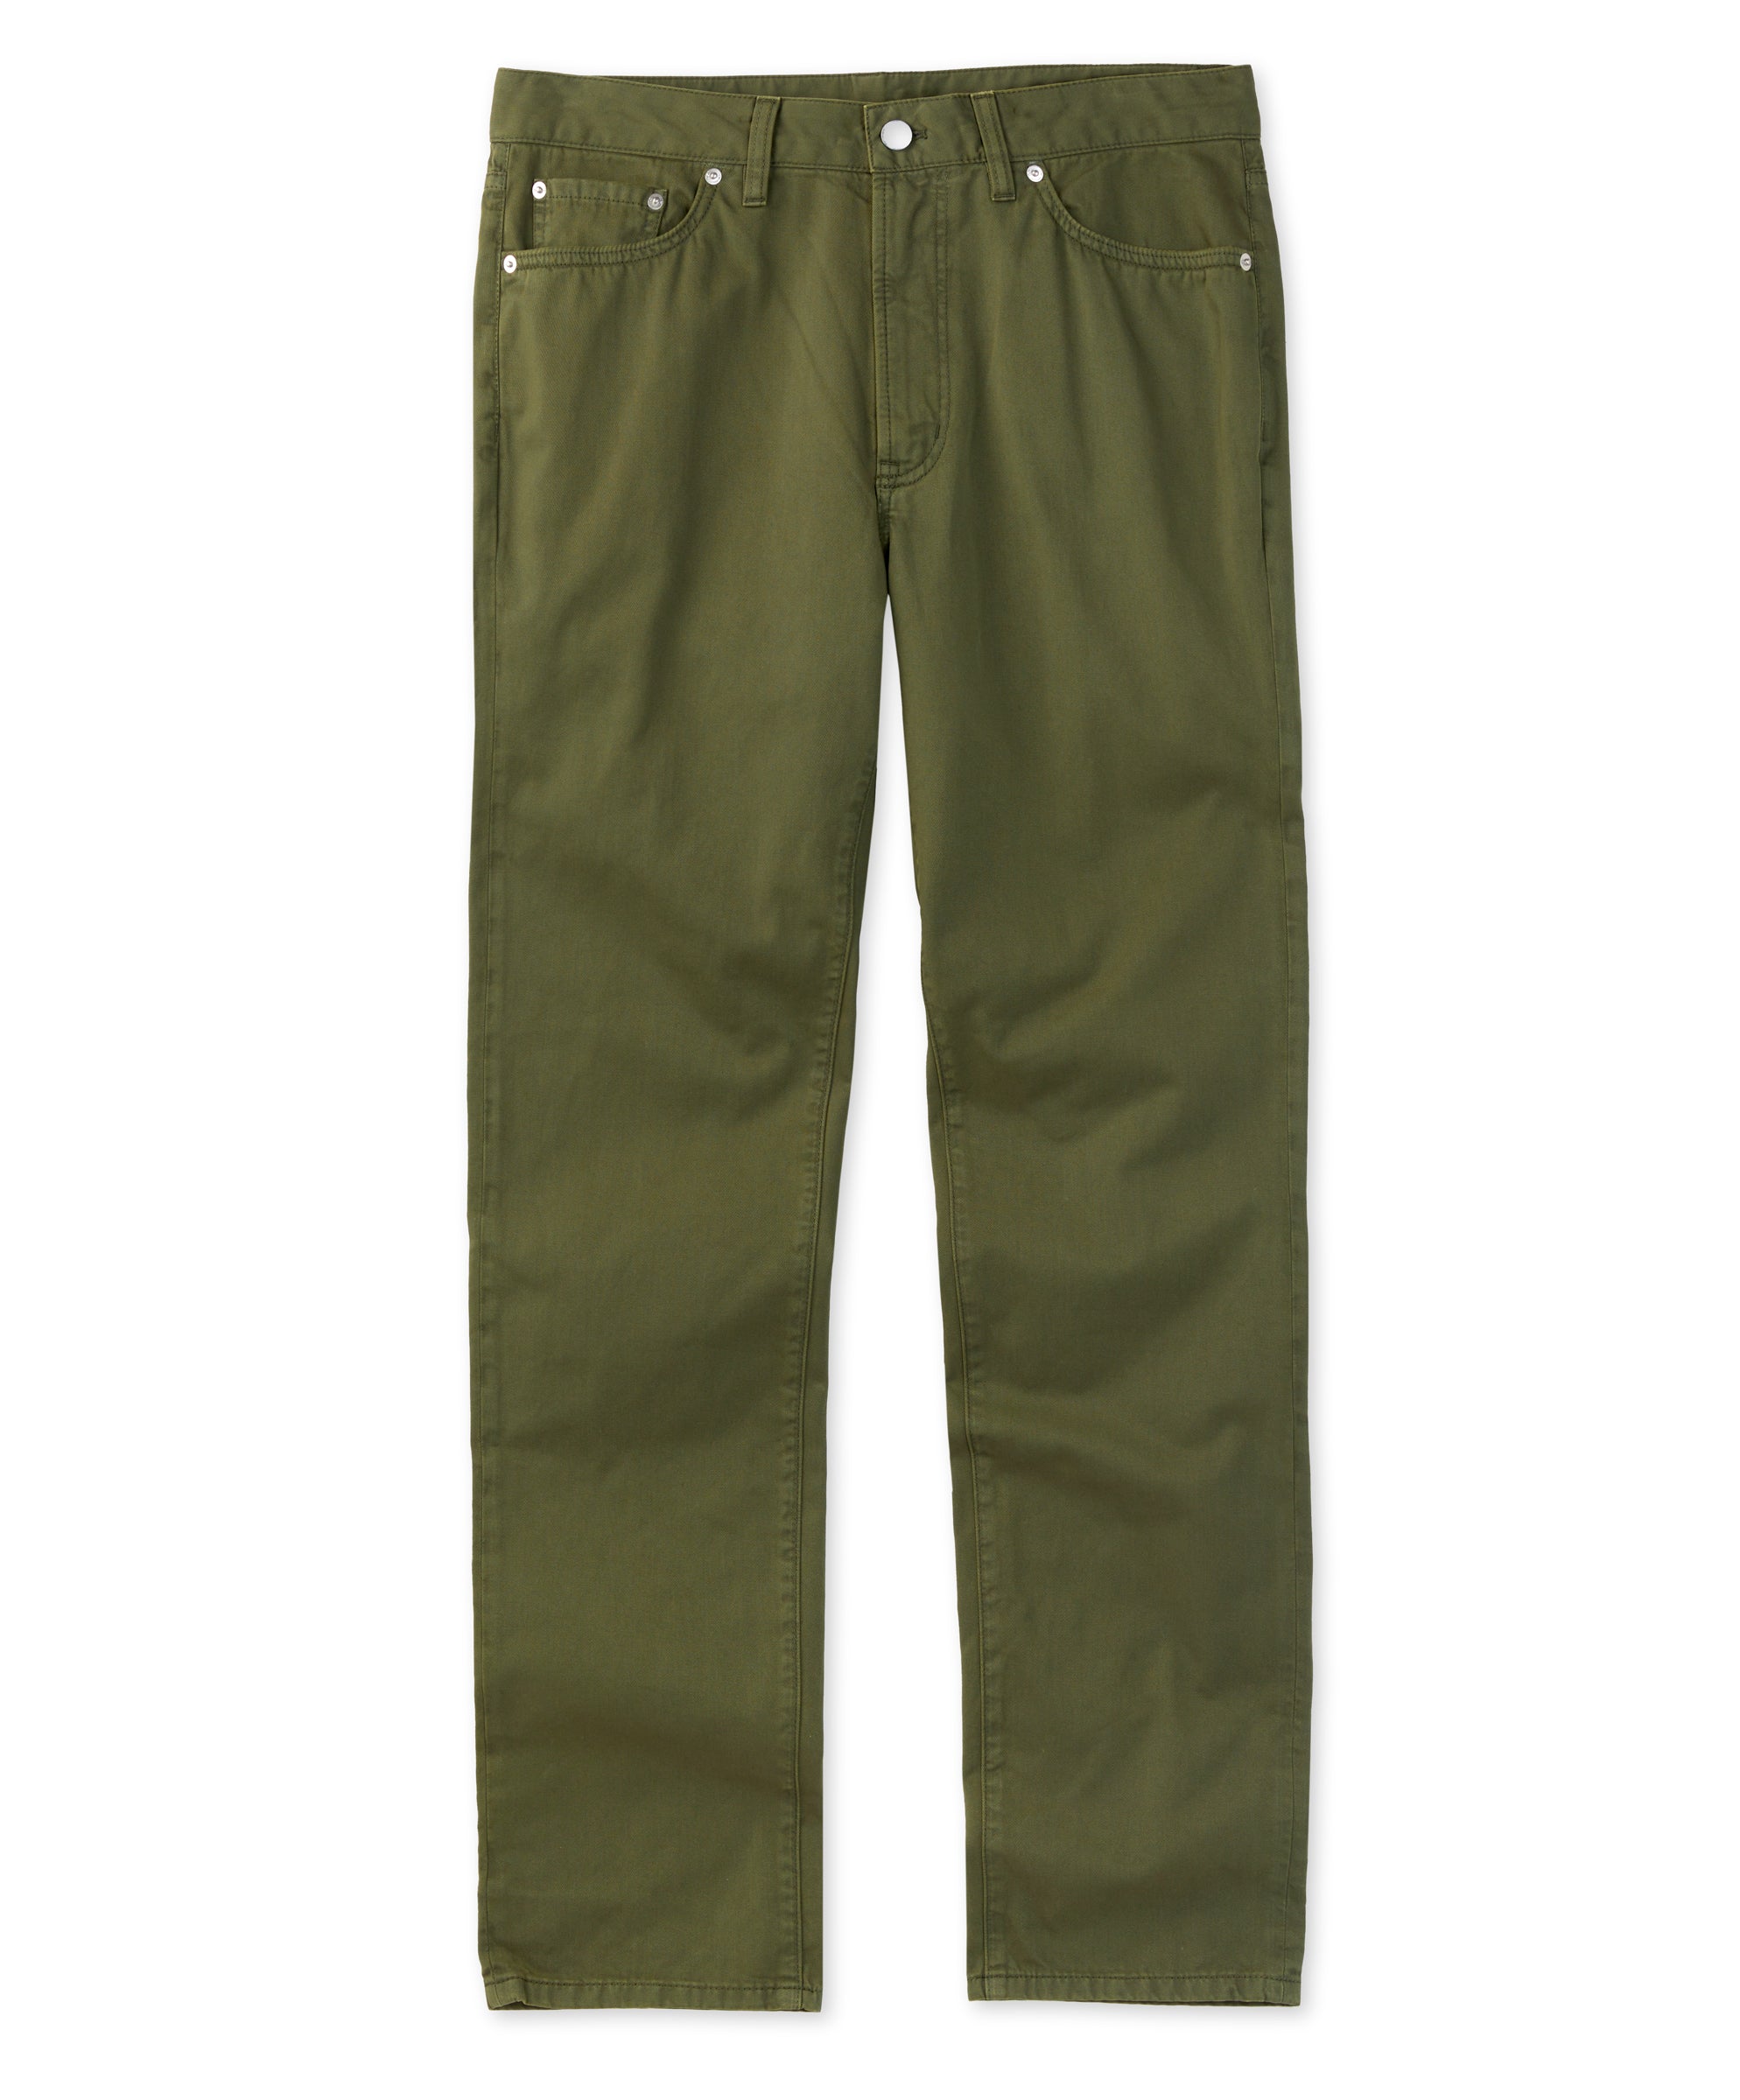 Ambassador Slim Fit Chino | Men's Pants | Outerknown